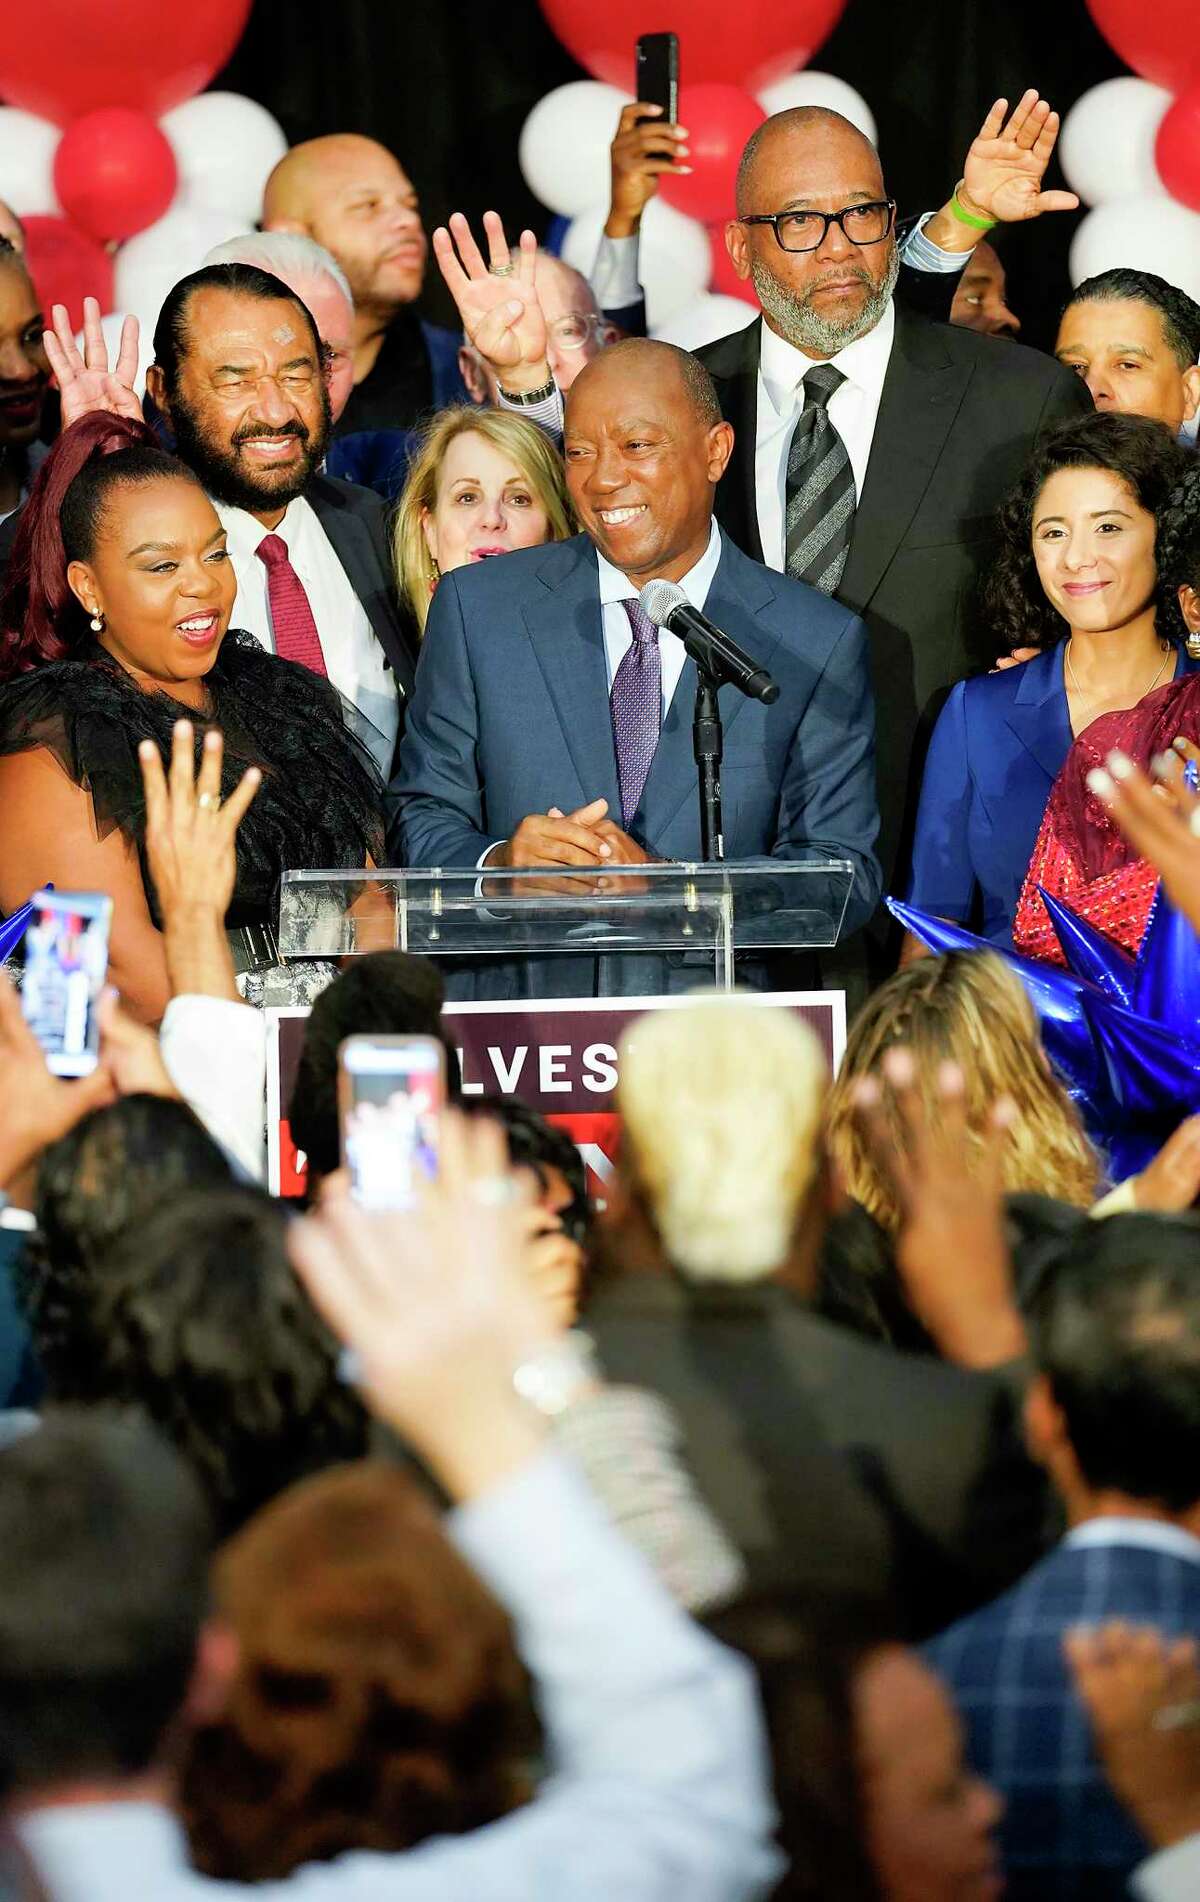 Houston Mayor Sylvester Turner addresses his supporters supporters at his election-night party at the George R. Brown Convention Center on Tuesday, Nov. 5, 2019 in Houston.